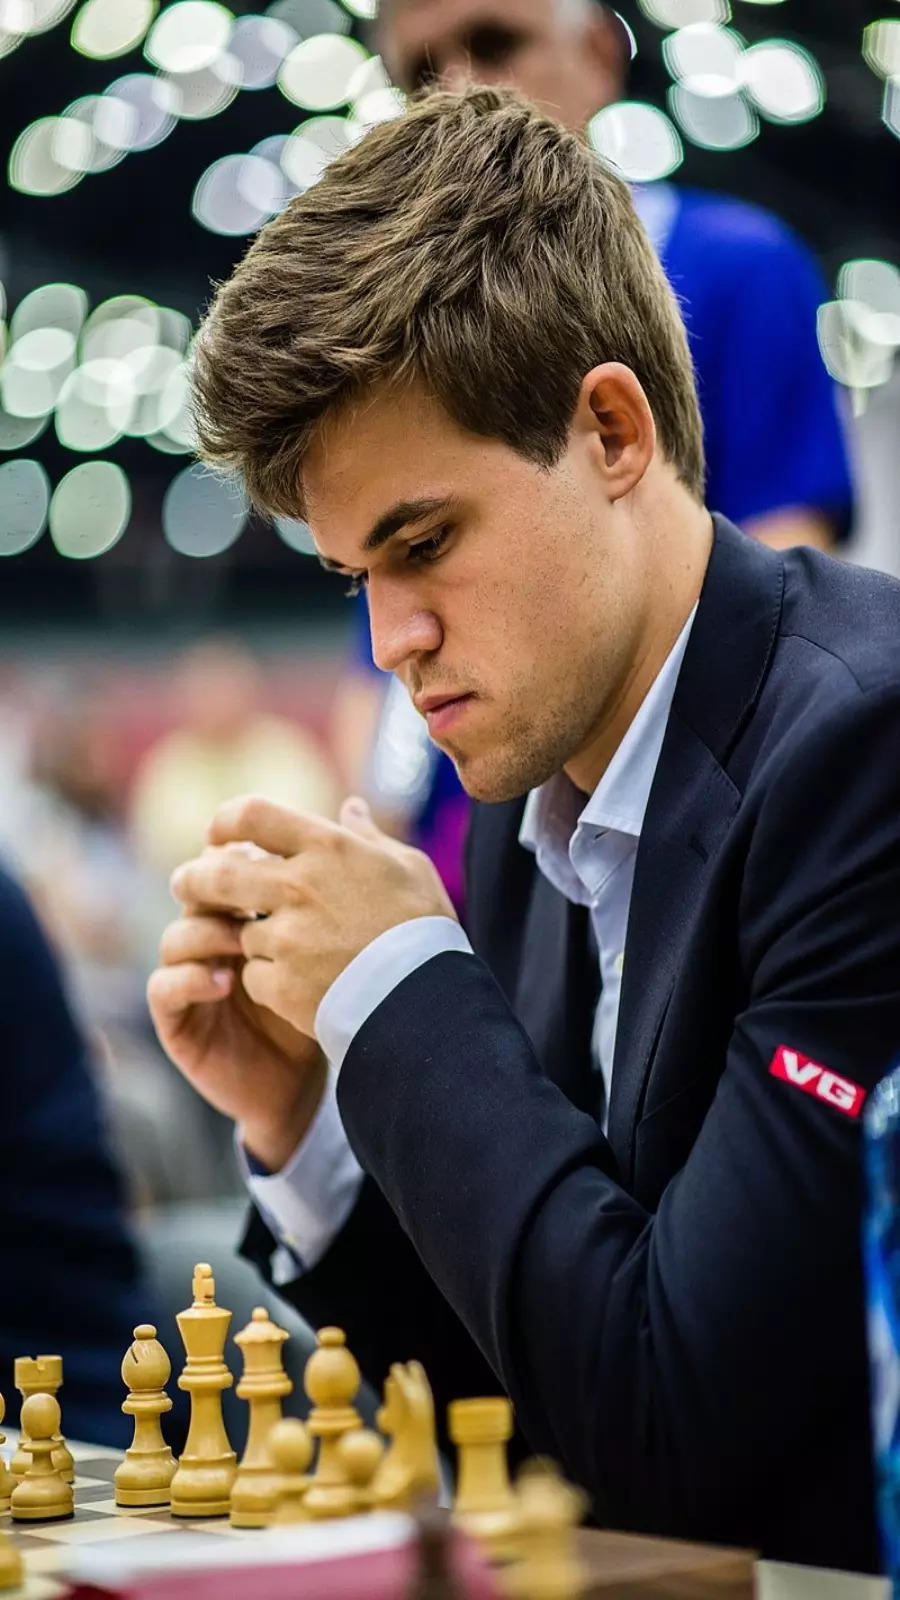 chess players: Top 10 Chess players in the world now